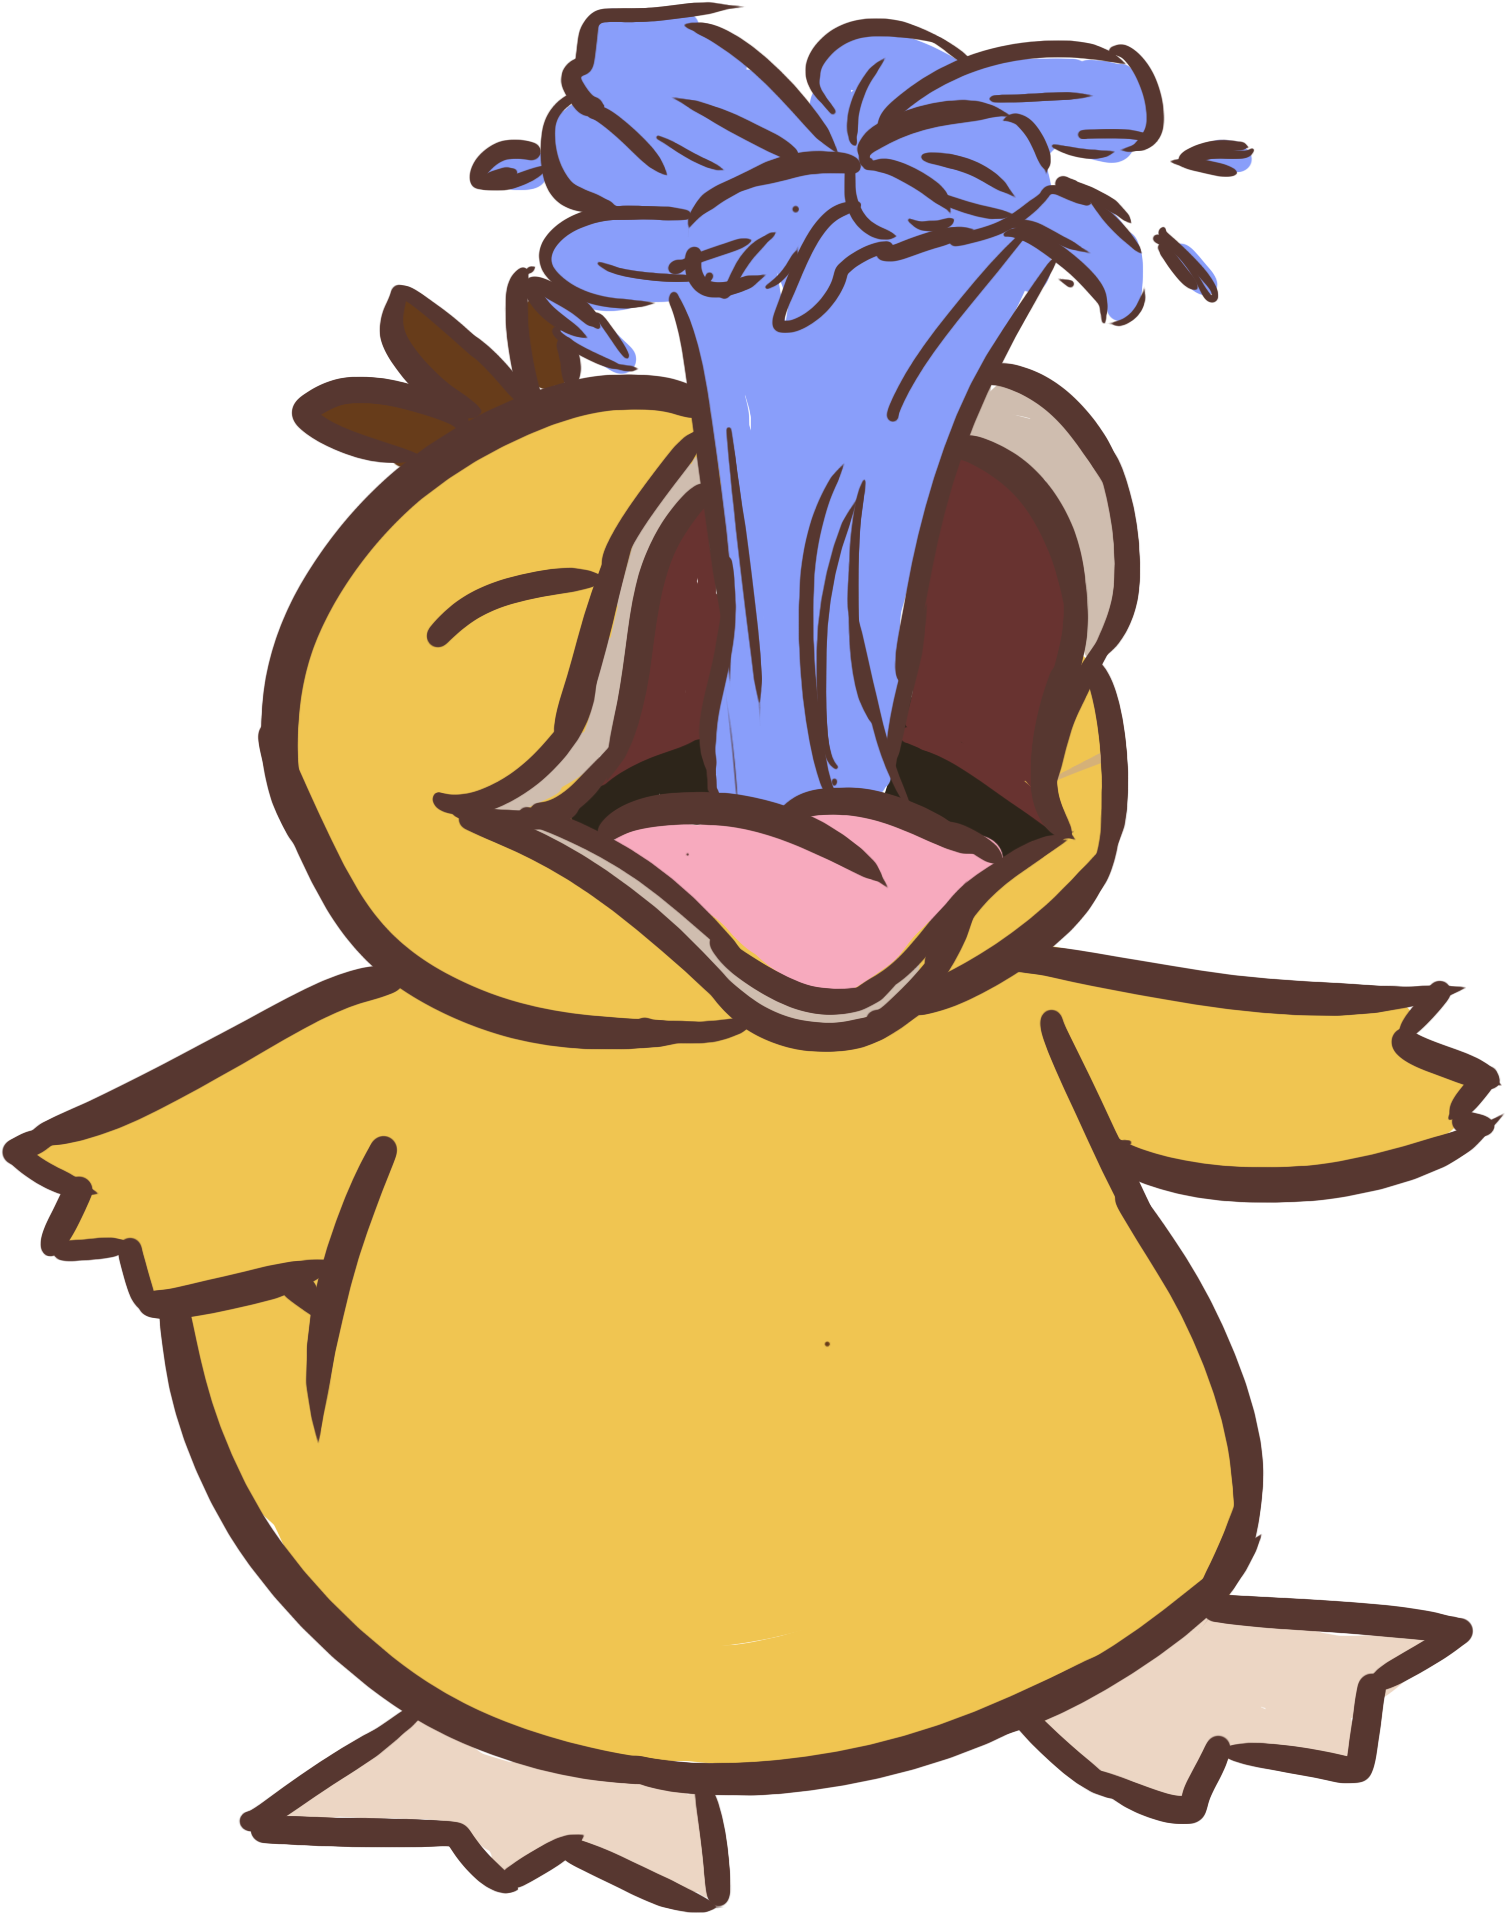 Psyduck Used Water Gun By Cynthistic - Psyduck Watergun (1534x2012)